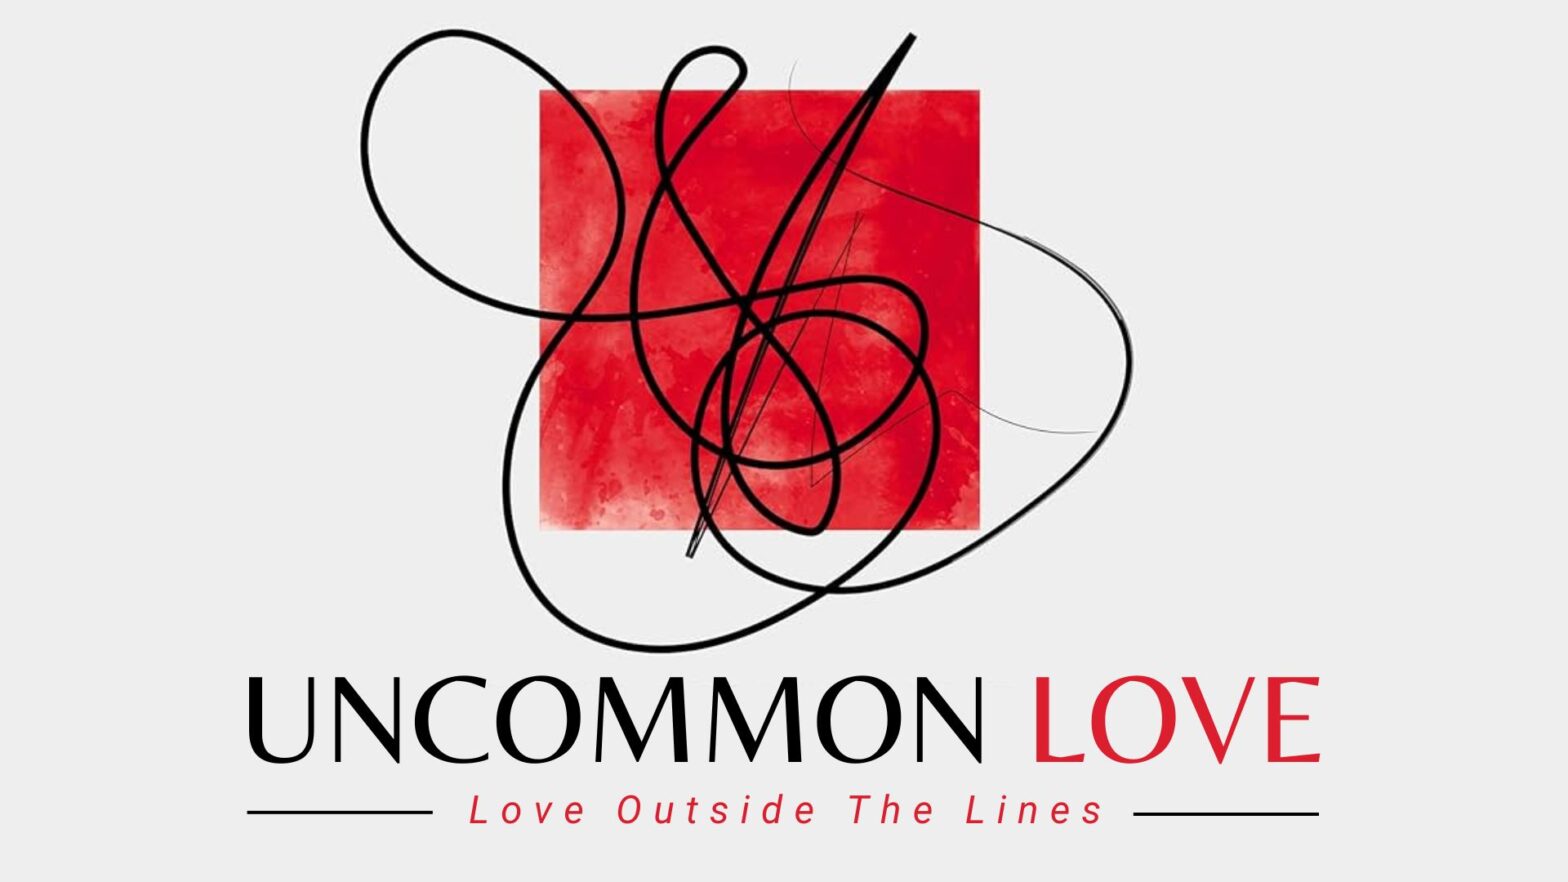 Uncommon Love (Love Outside The Lines)